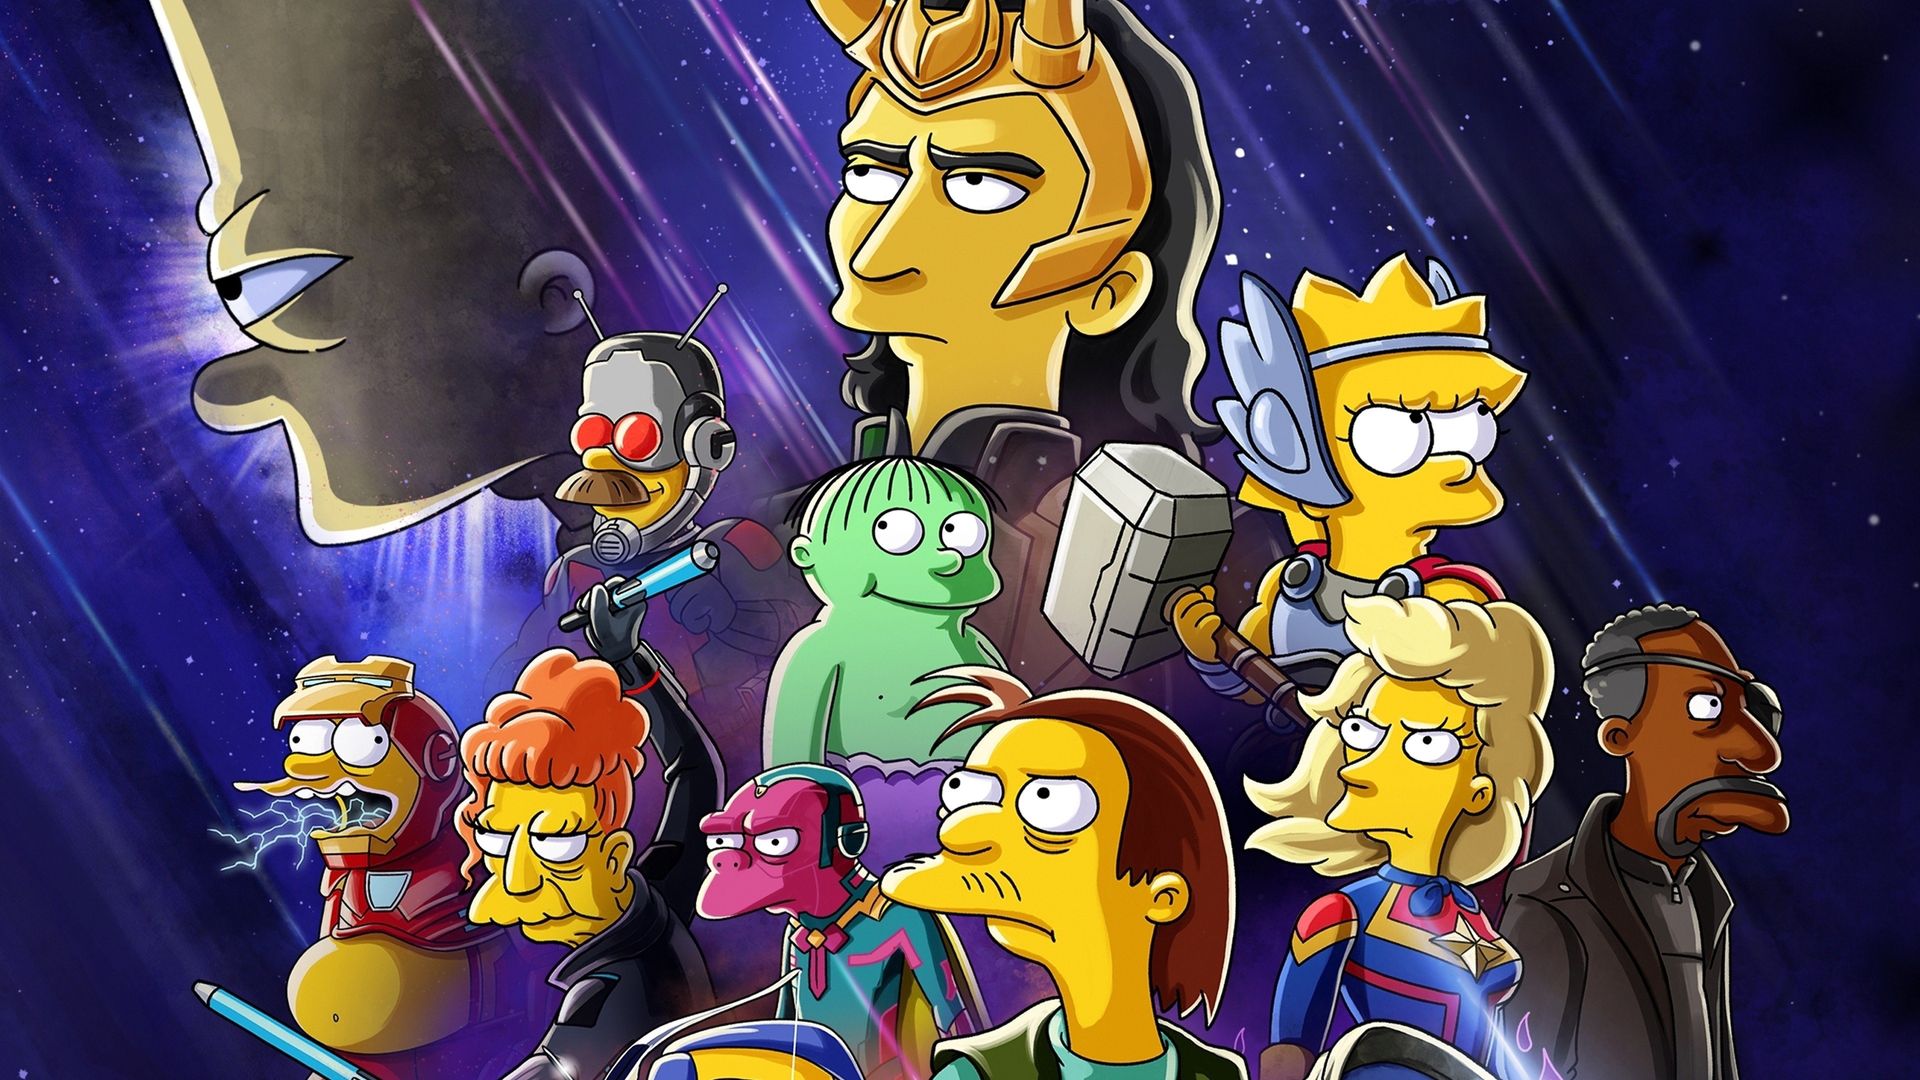 The Simpsons: The Good, the Bart, and the Loki Backdrop